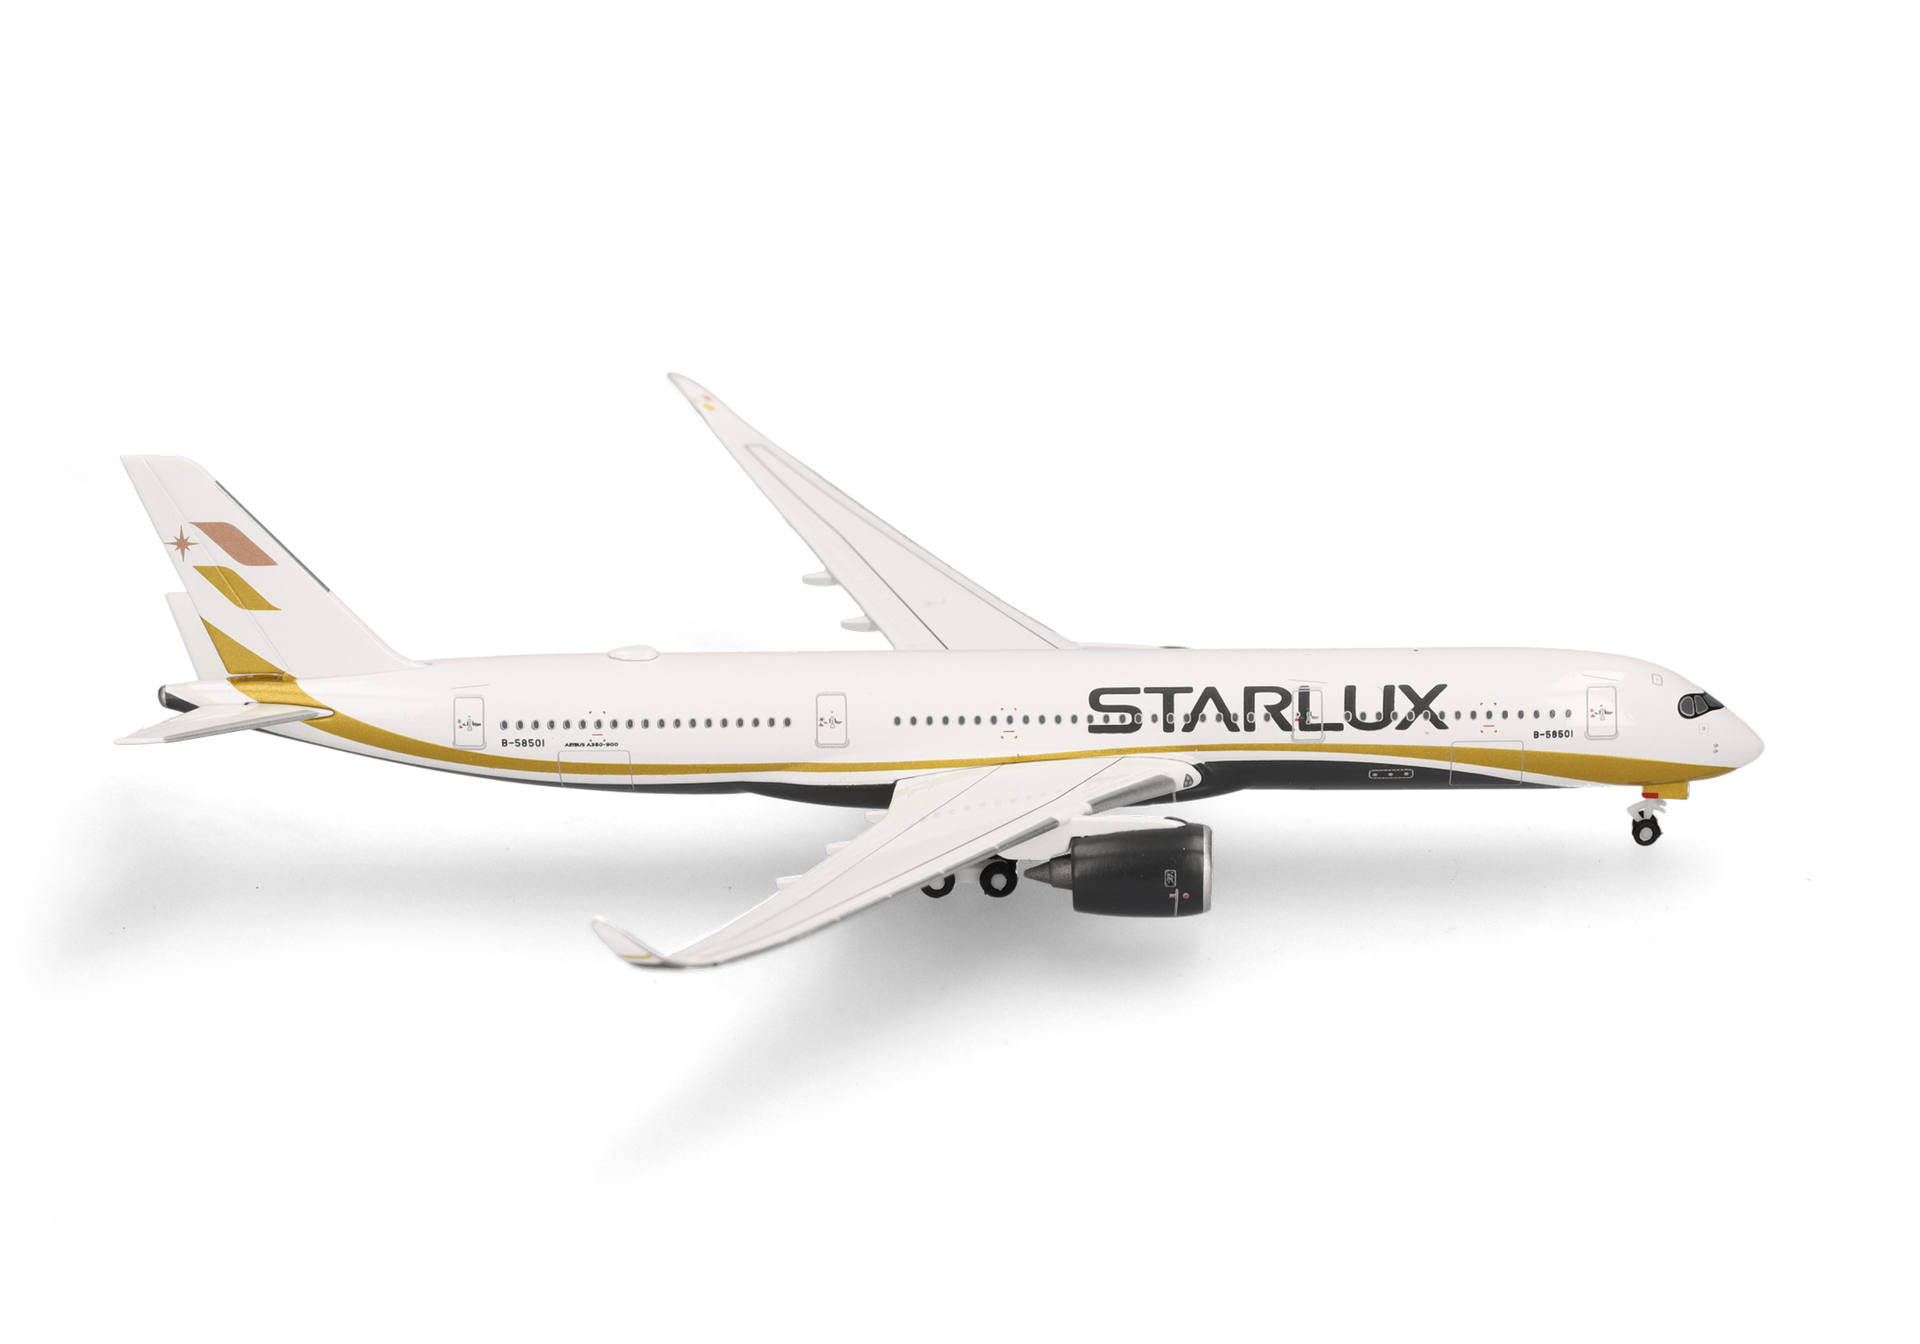 Starlux Airlines Airbus A350-900 – B-58501